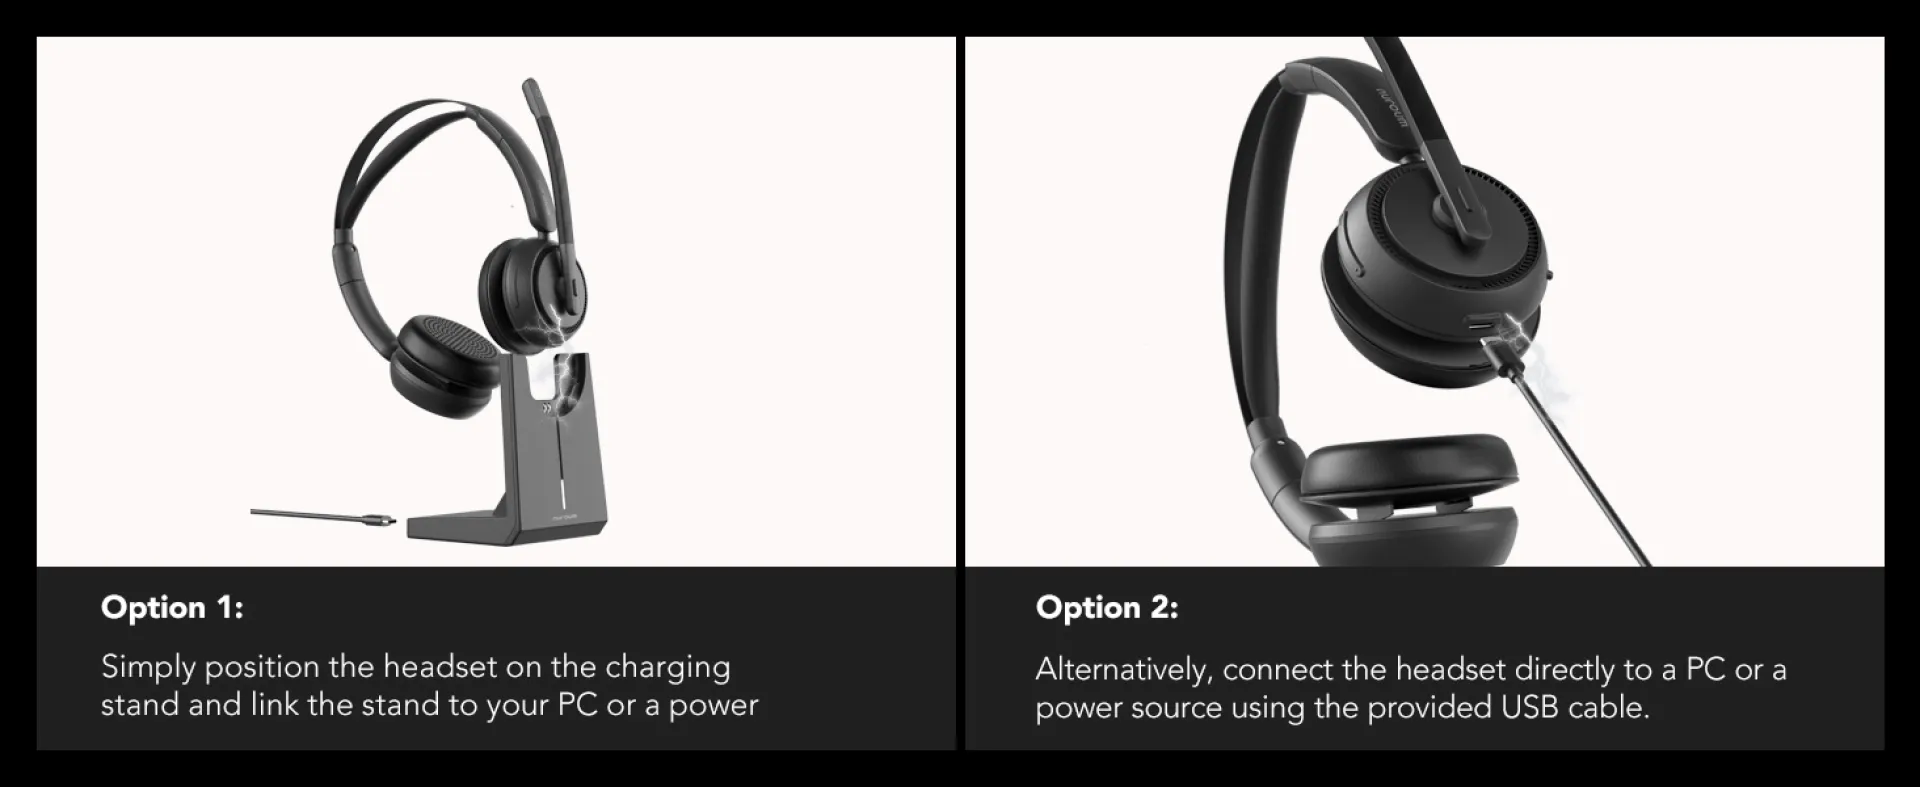 Two Charging Options